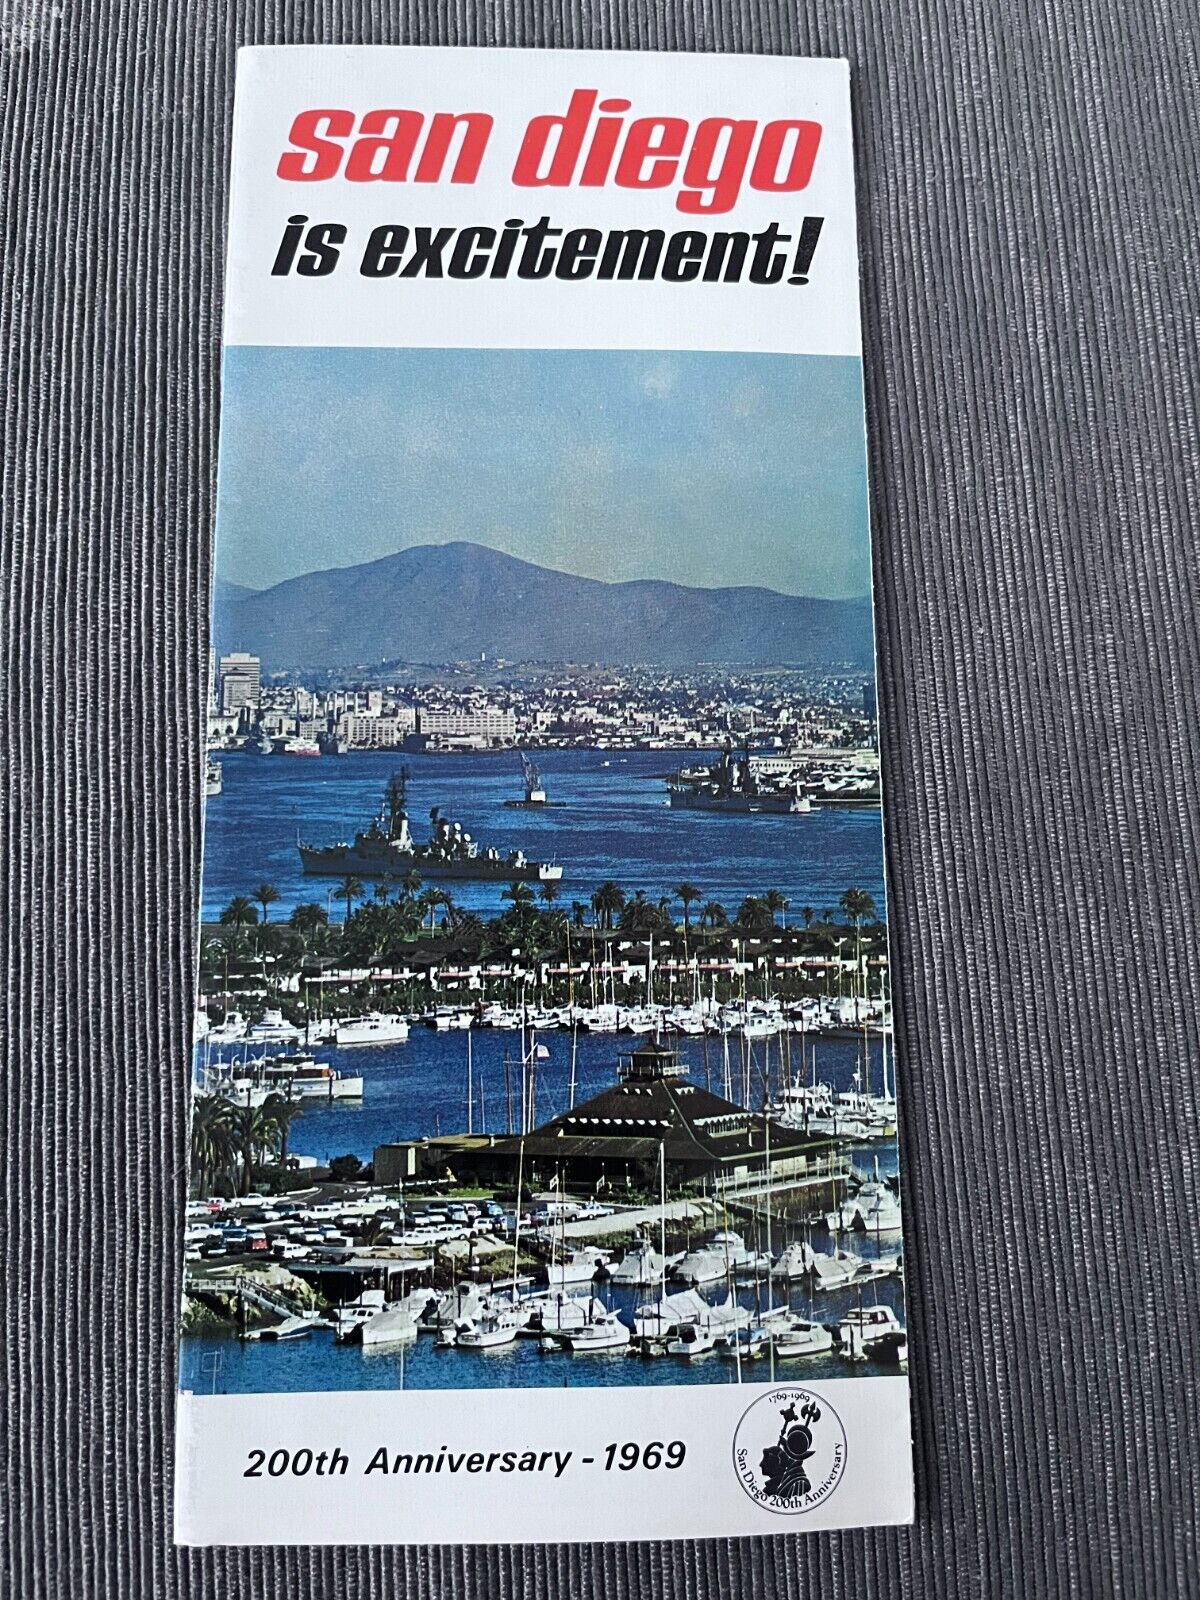 San Diego is Excitement 200th Anniversary California brochure 1969